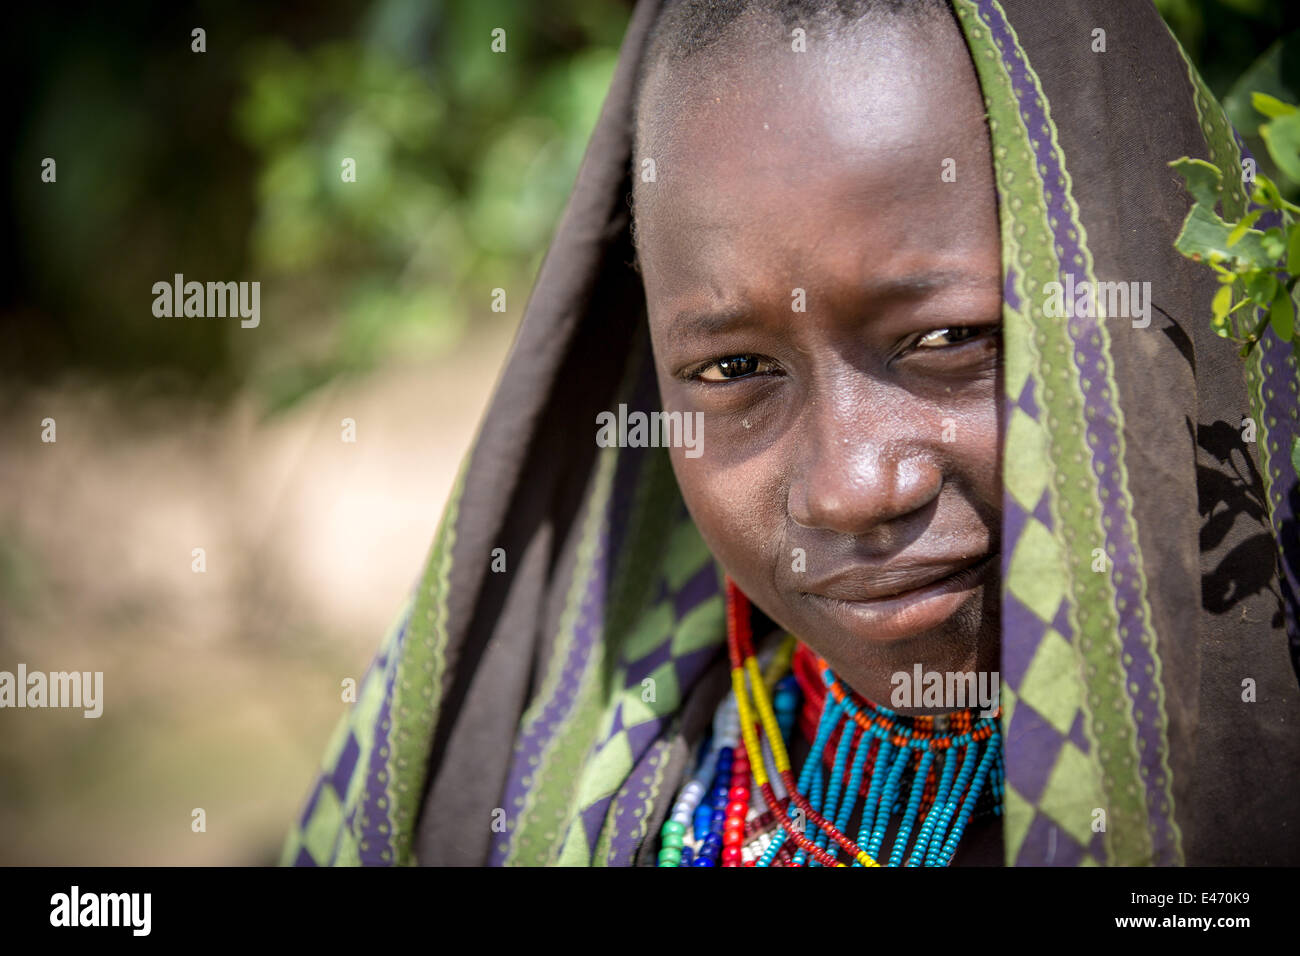 The Erbore tribe is a small tribe that lives in the southwest region of the Omo Valley on 17 May 2014 Stock Photo